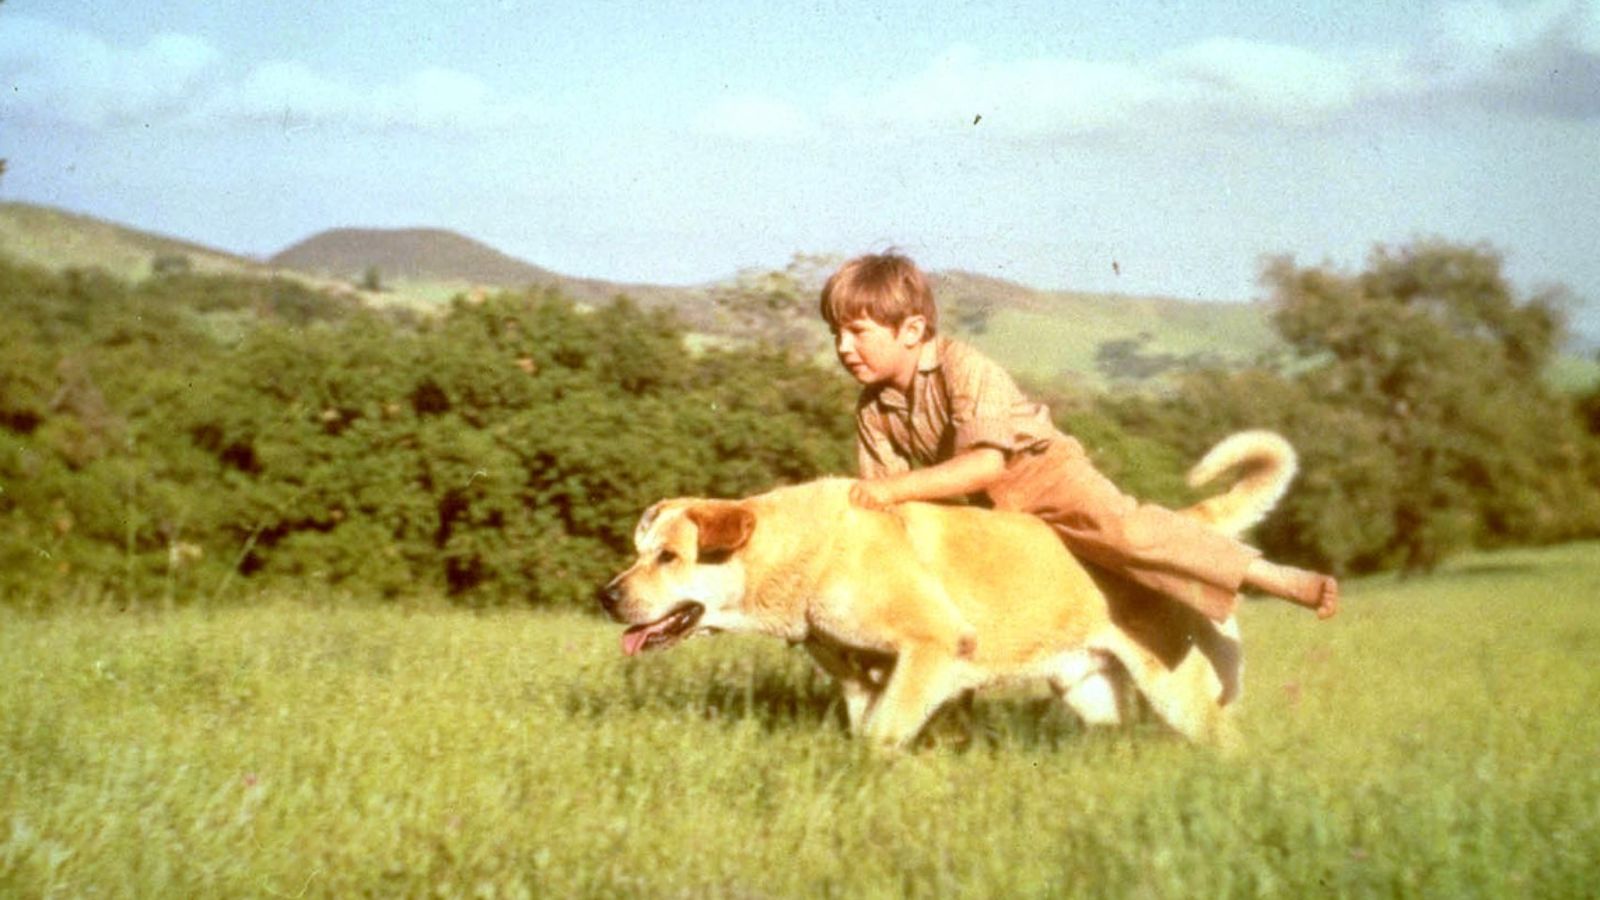 <p>“Old Yeller” is like that first childhood lesson in mortality that nobody asked for but everyone got. After bravely defending his family, the beloved dog faces a tragic end, teaching us all about the responsibilities that come with love. It’s such a powerful ending that <a href="https://www.imdb.com/title/tt0050798/trivia/?item=tr4863755&ref_=ext_shr_lnk">the Library of Congress decided</a> to preserve it in the National Film Registry.</p>